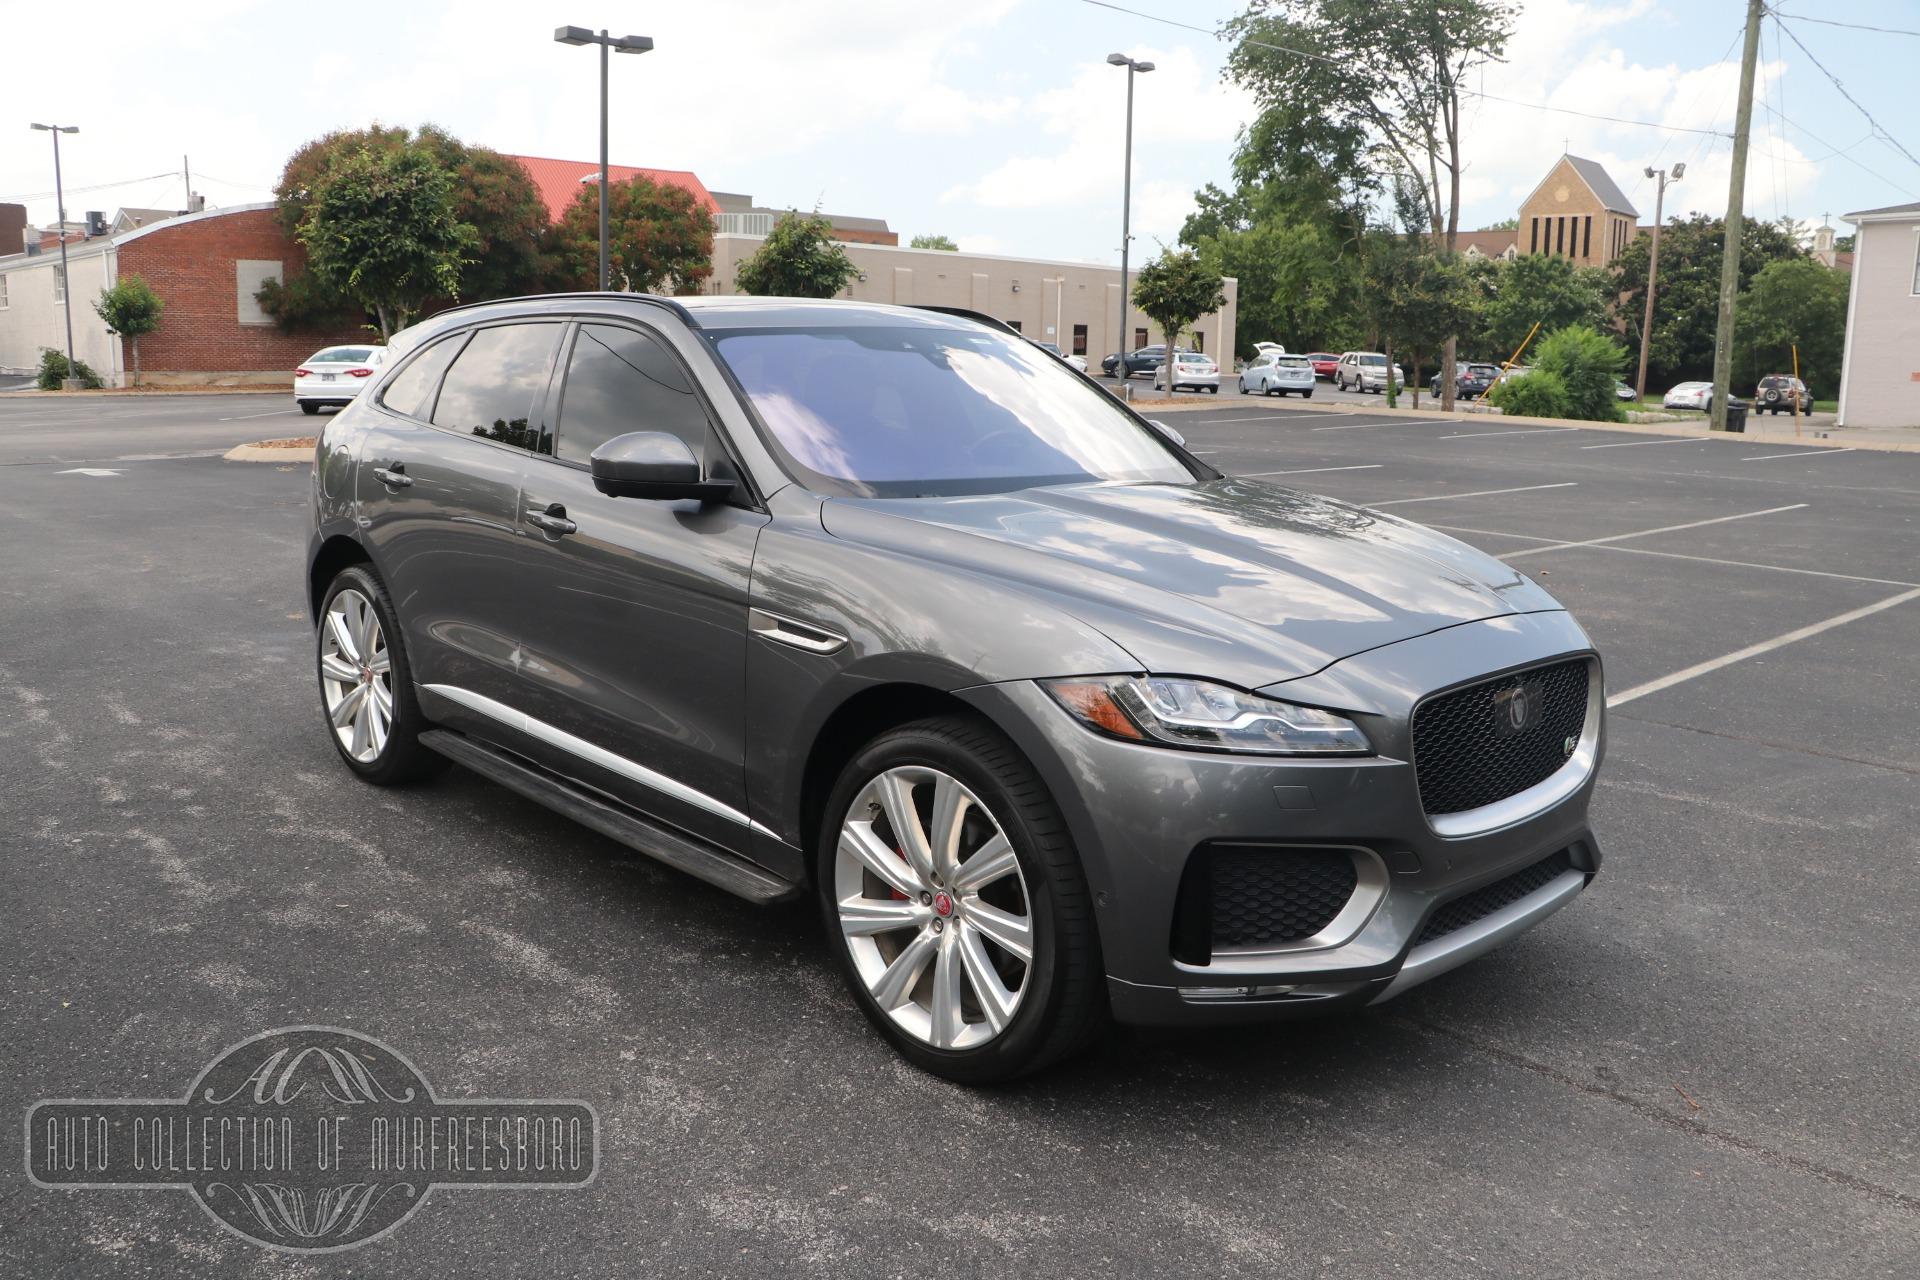 Used 2017 Jaguar F-PACE LUXUARY INTERIOR TECH PKG W/NAV for sale $34,300 at Auto Collection in Murfreesboro TN 37130 1